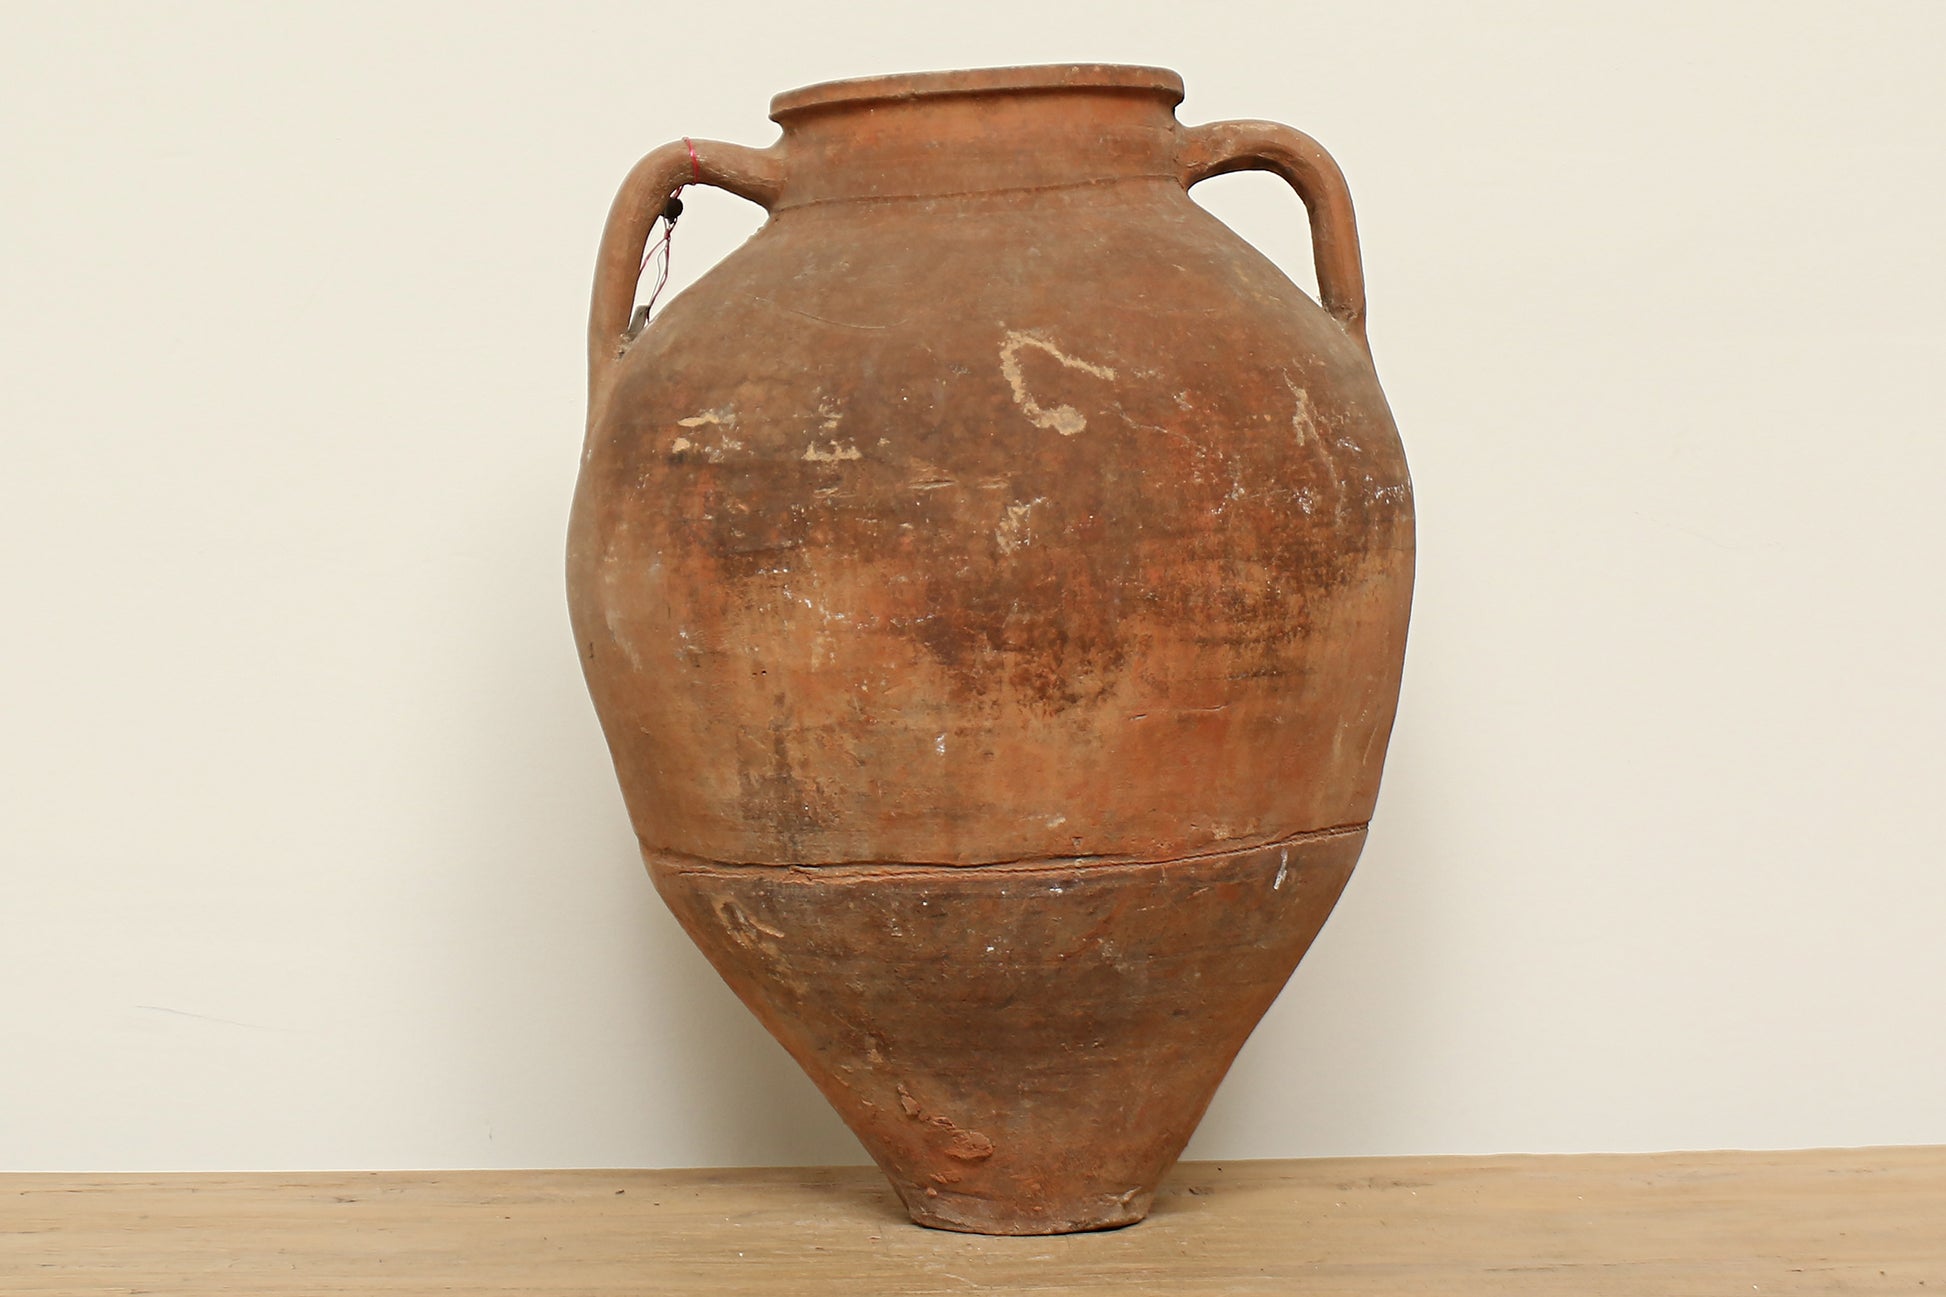 SOLD - Antique Olive Oil Storage Pot from the Aegean Sea Region of